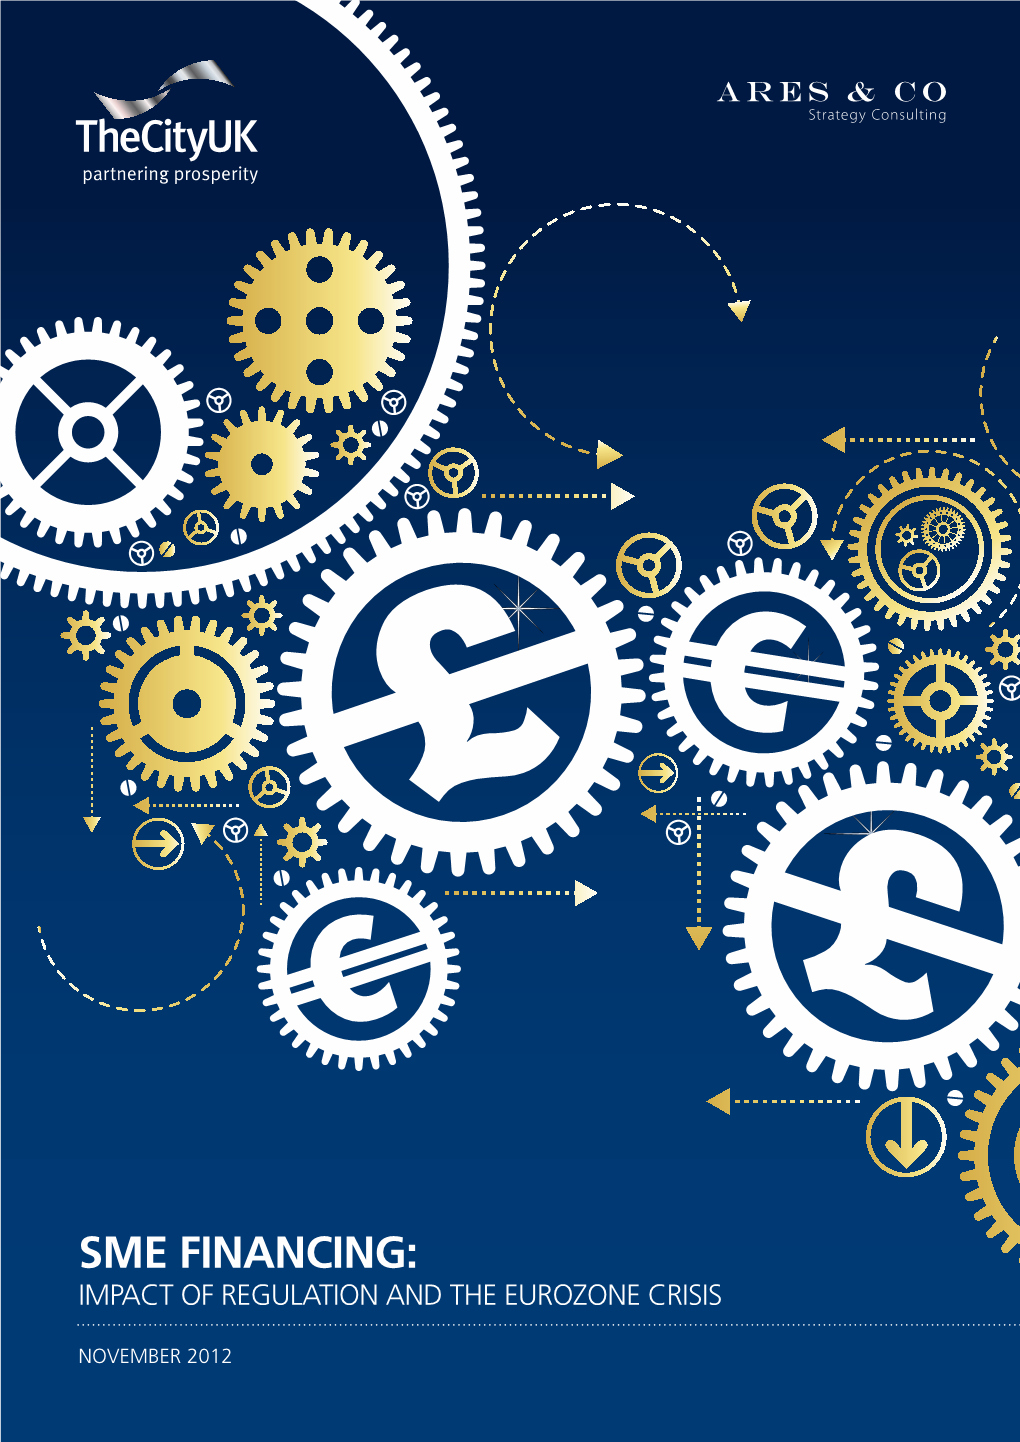 SME Financing: Impact of Regulation and the Eurozone Crisis